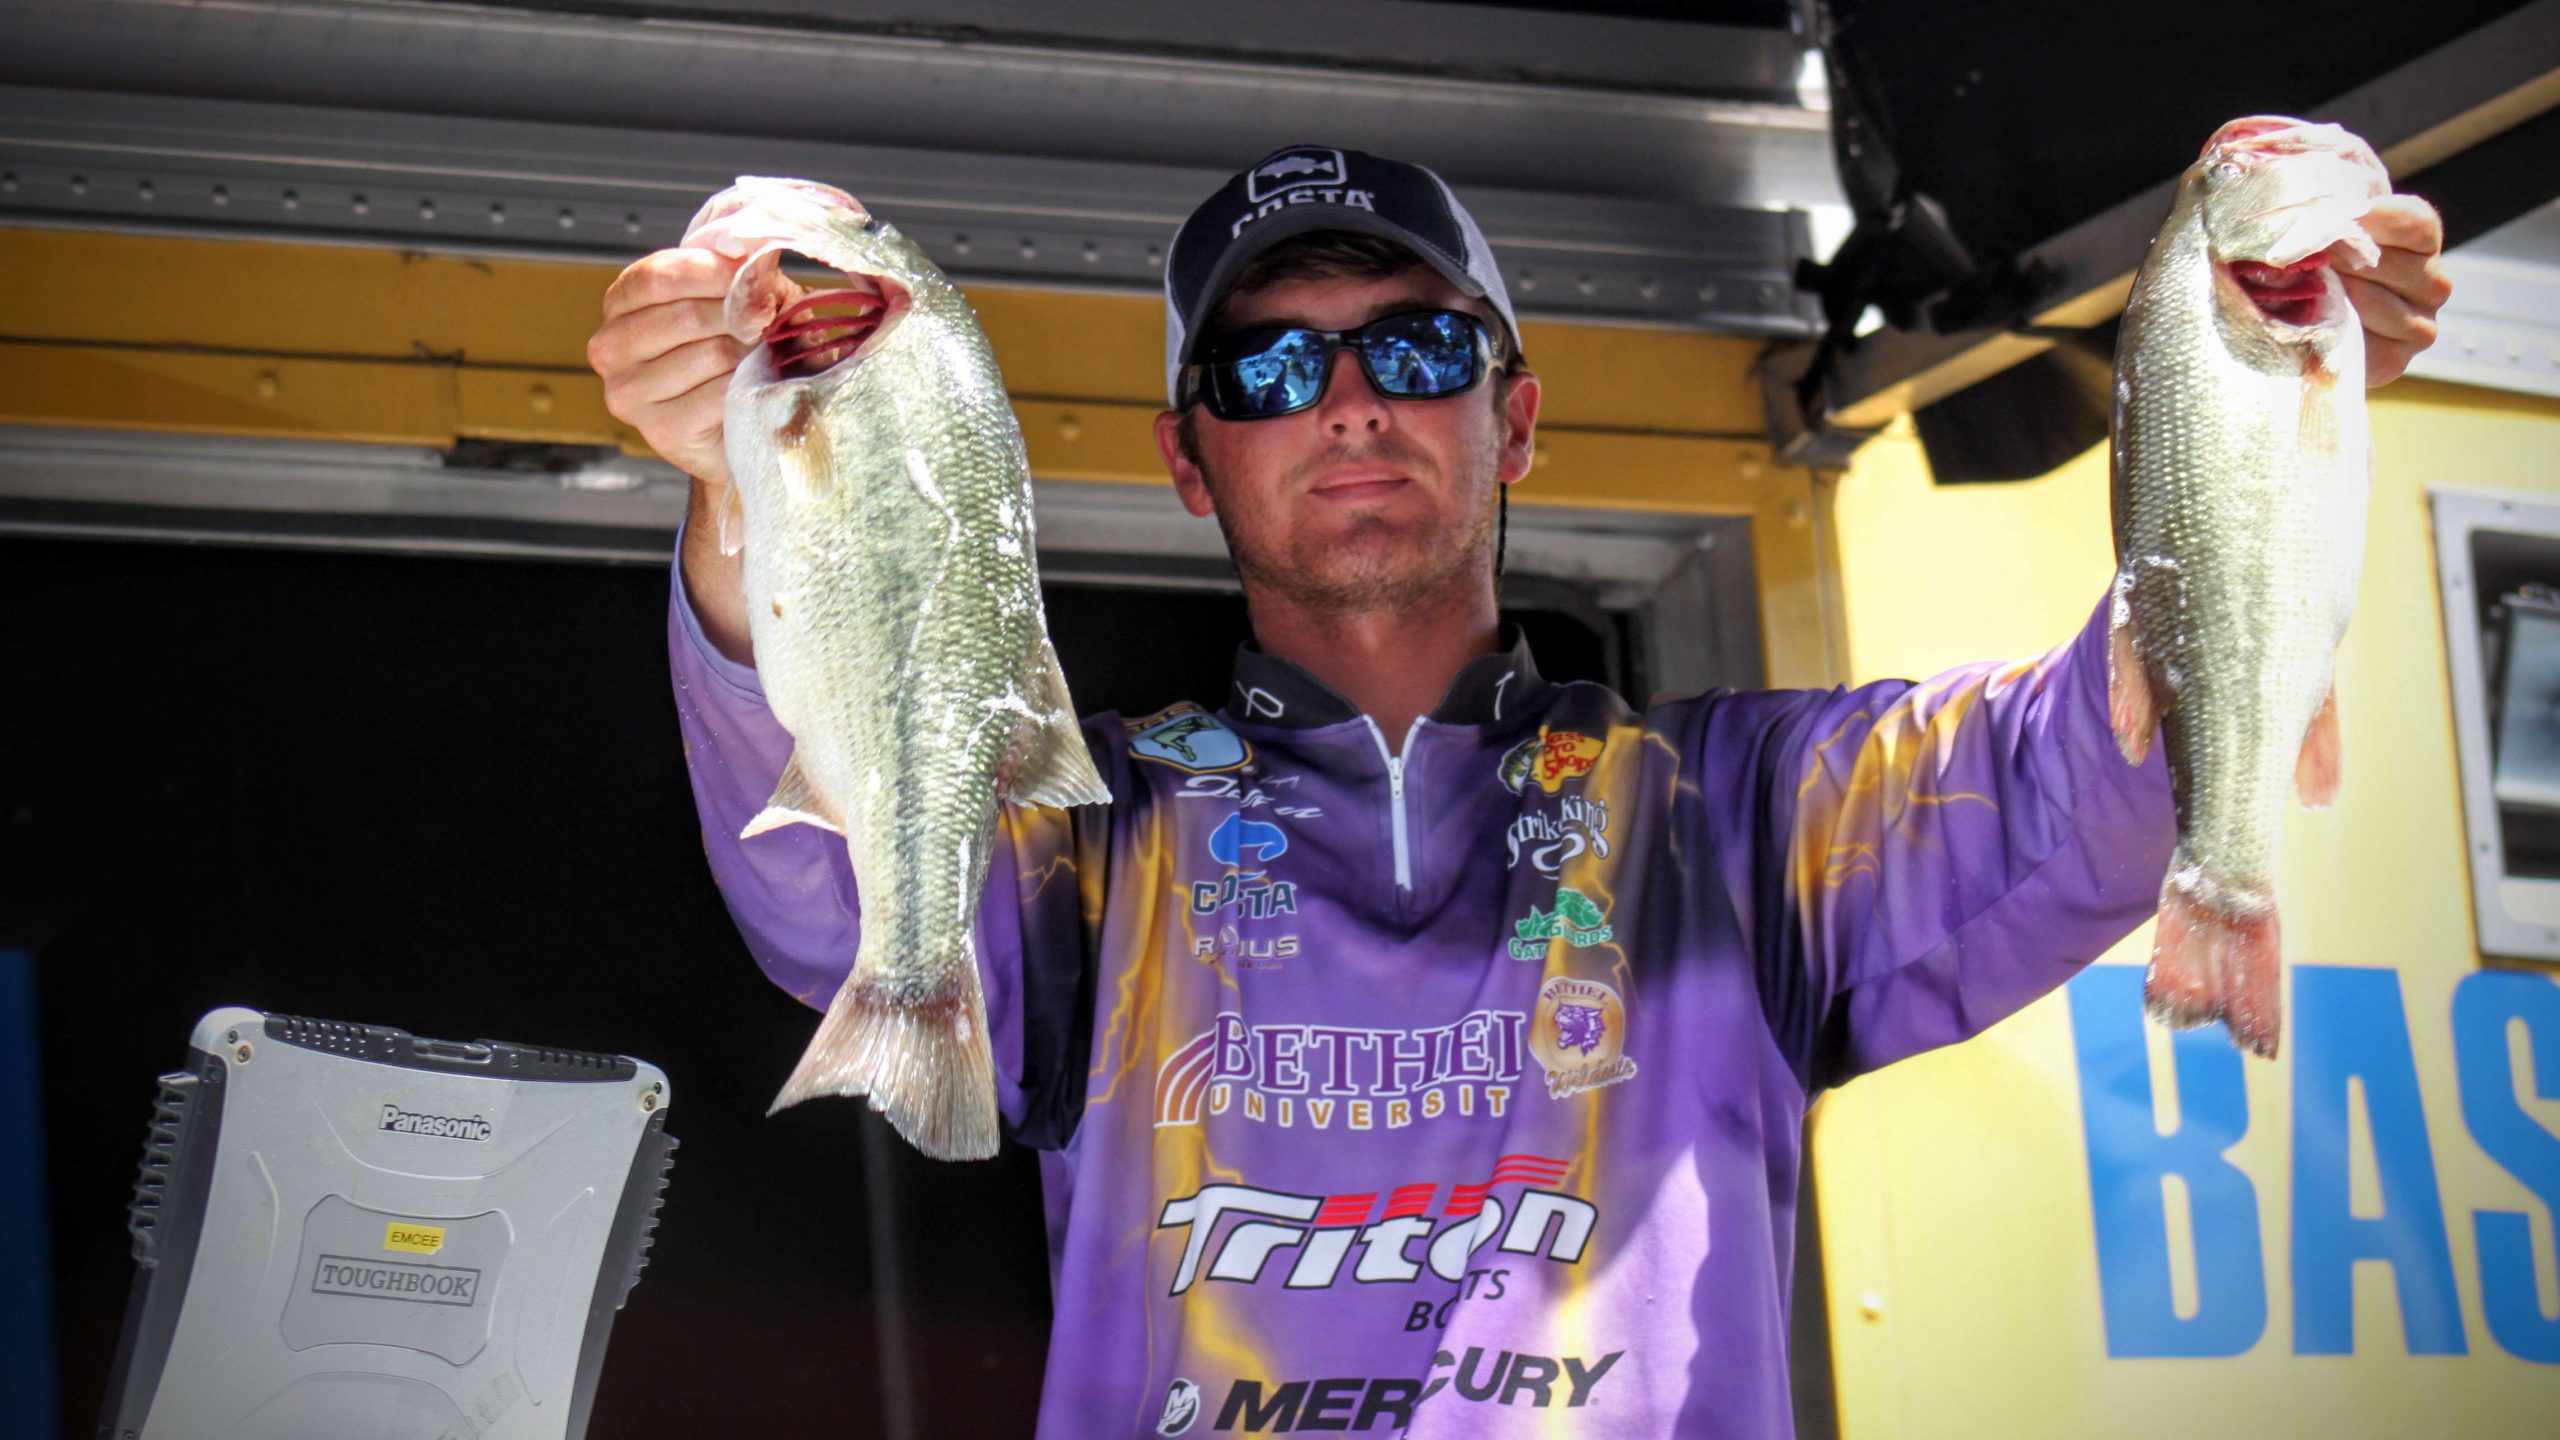 Garrett caught five bass on Saturday for a total of 14 pounds, 13 ounces. He caught a total of 46-9 over the three-day tournament.